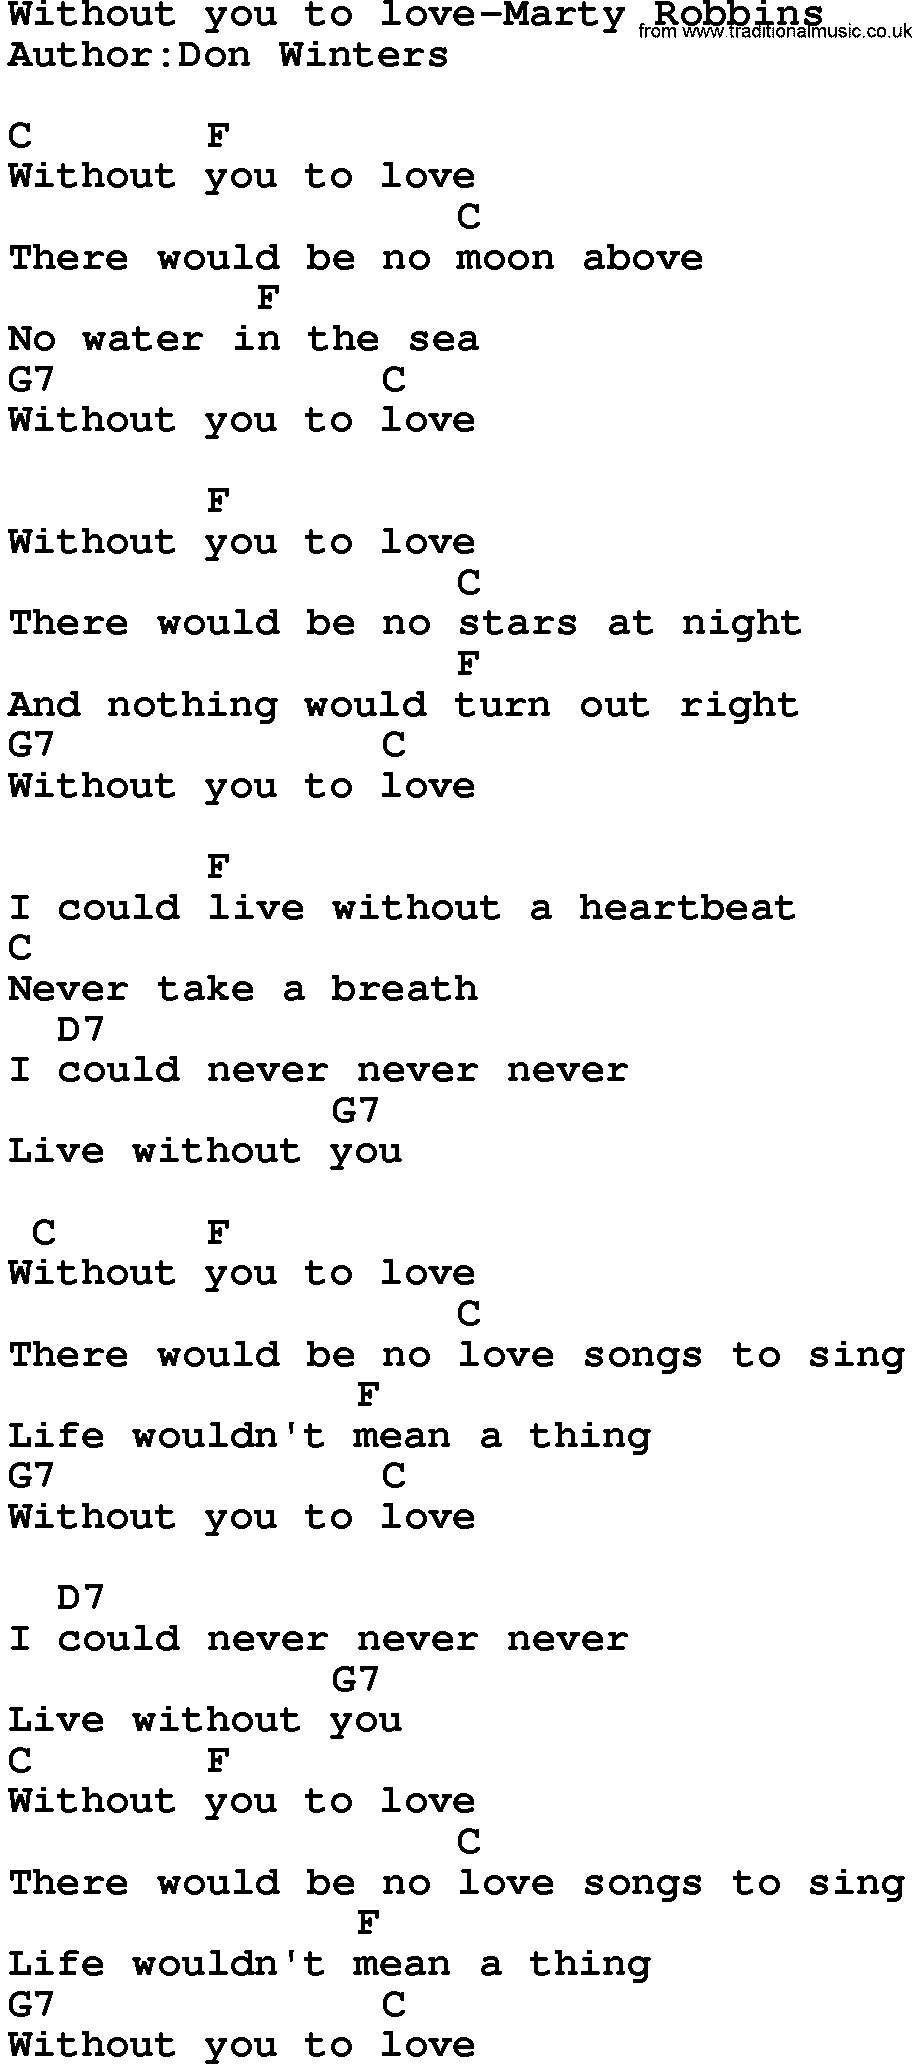 Country music song: Without You To Love-Marty Robbins lyrics and chords